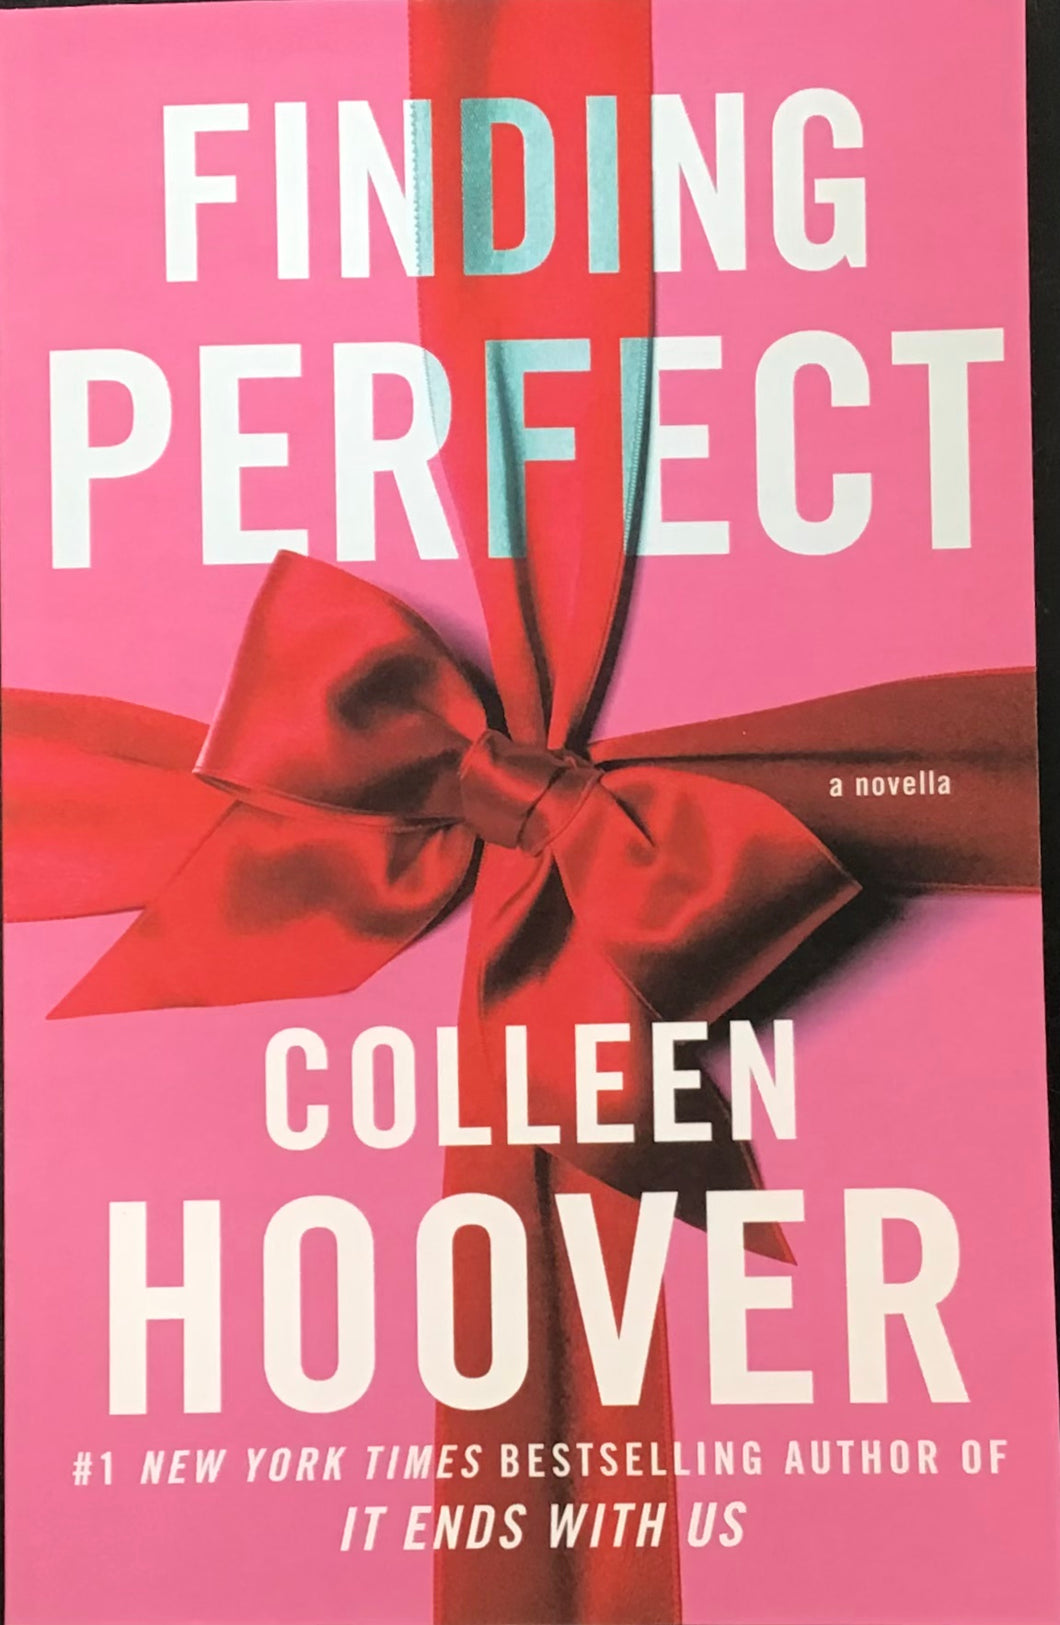 Finding Perfect- Colleen Hoover